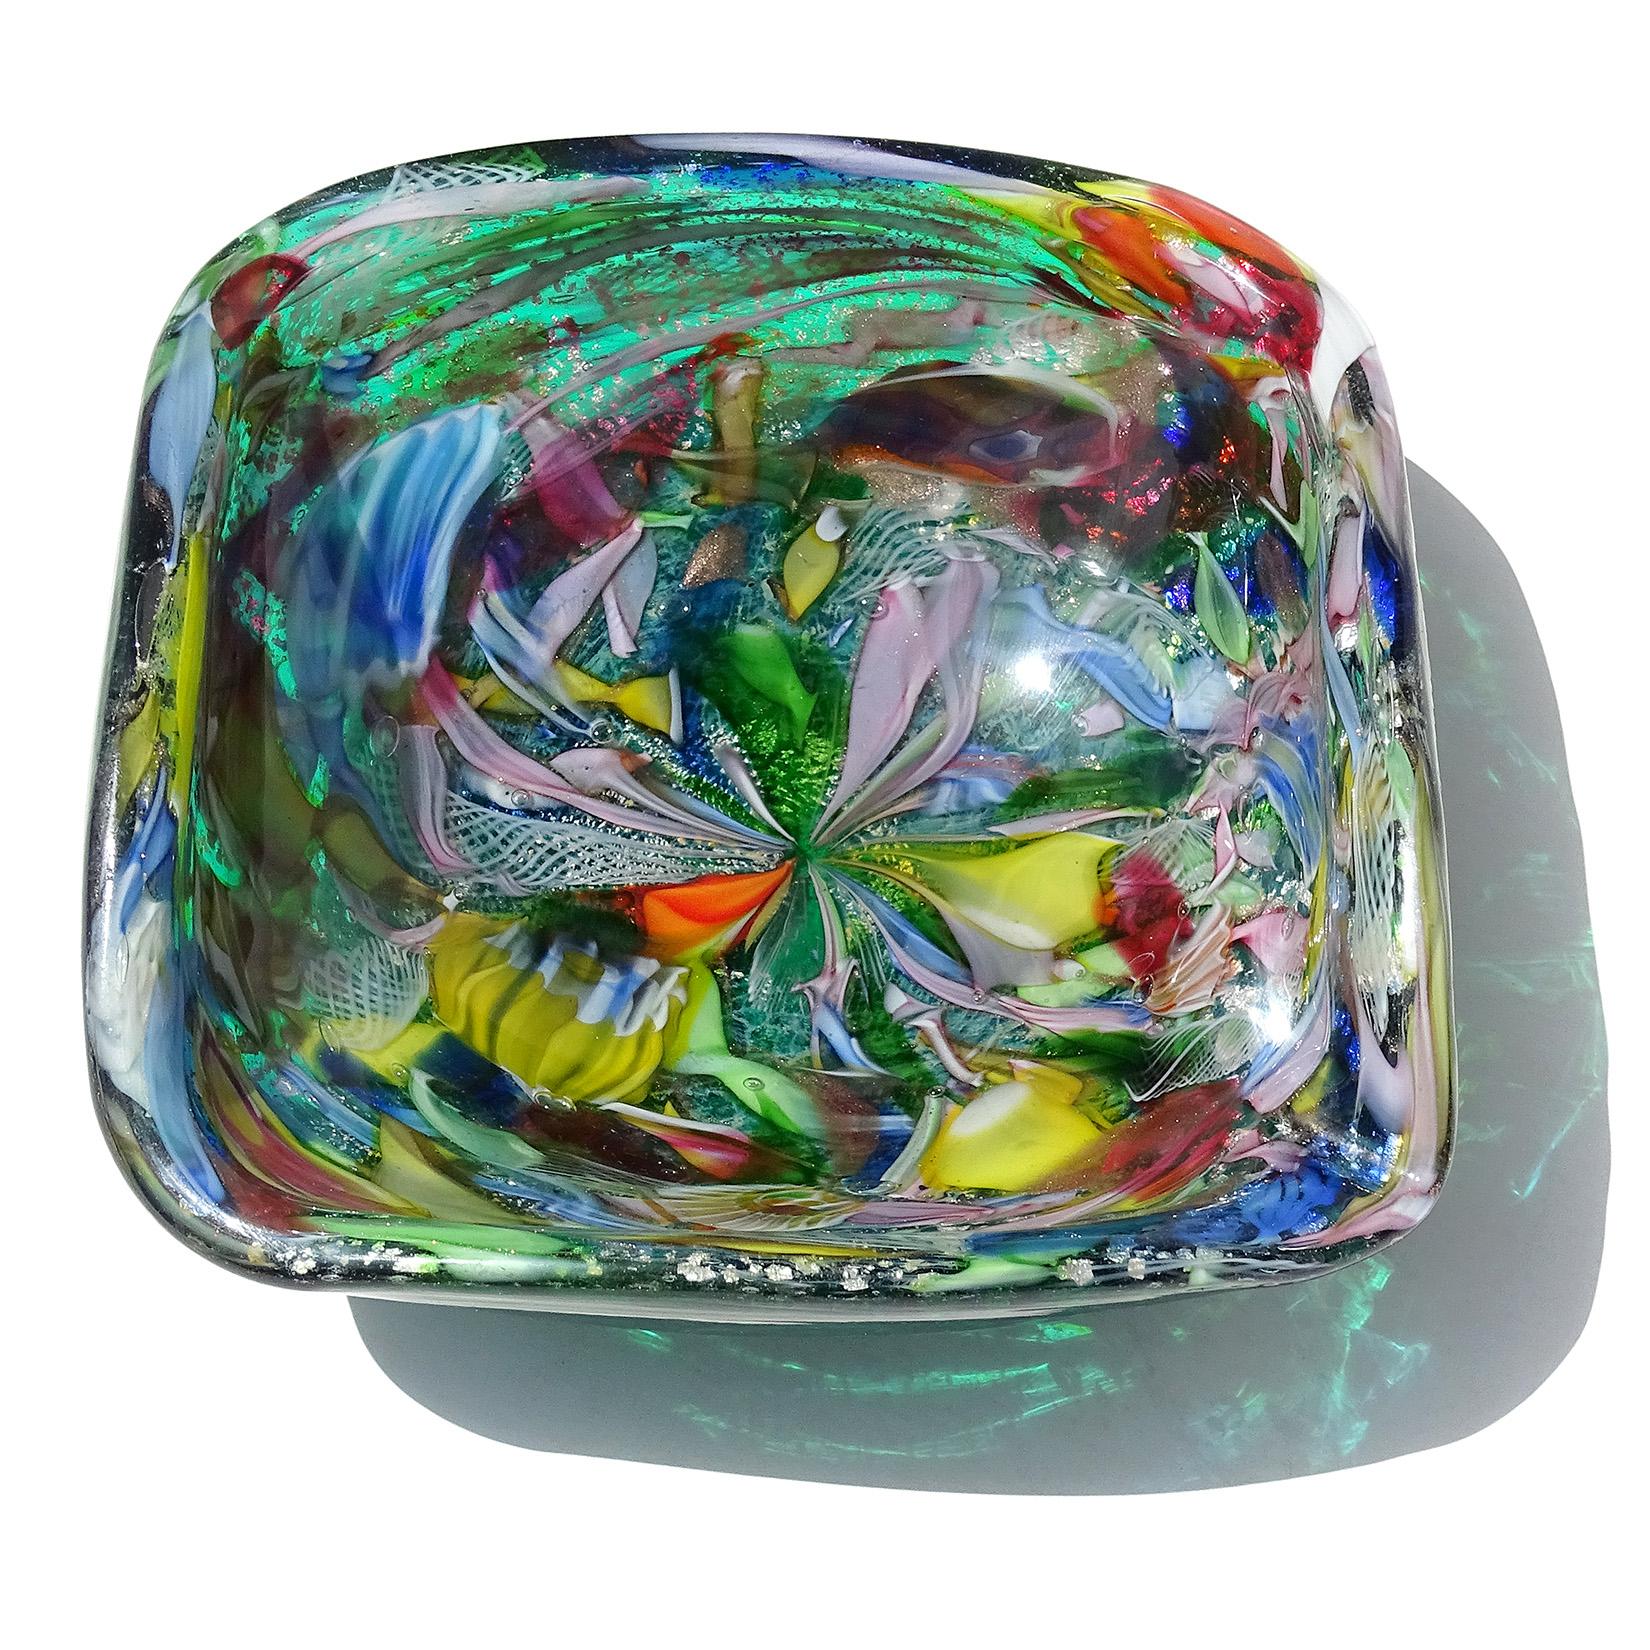 Beautiful vintage Murano hand blown green, silver flecks, copper aventurine, millefiori flower murrines and twisted ribbons Italian art glass bowl / ashtray. Documented to the A.Ve.M. (Arte Vetraria Muranese) company. The pattern is published in the